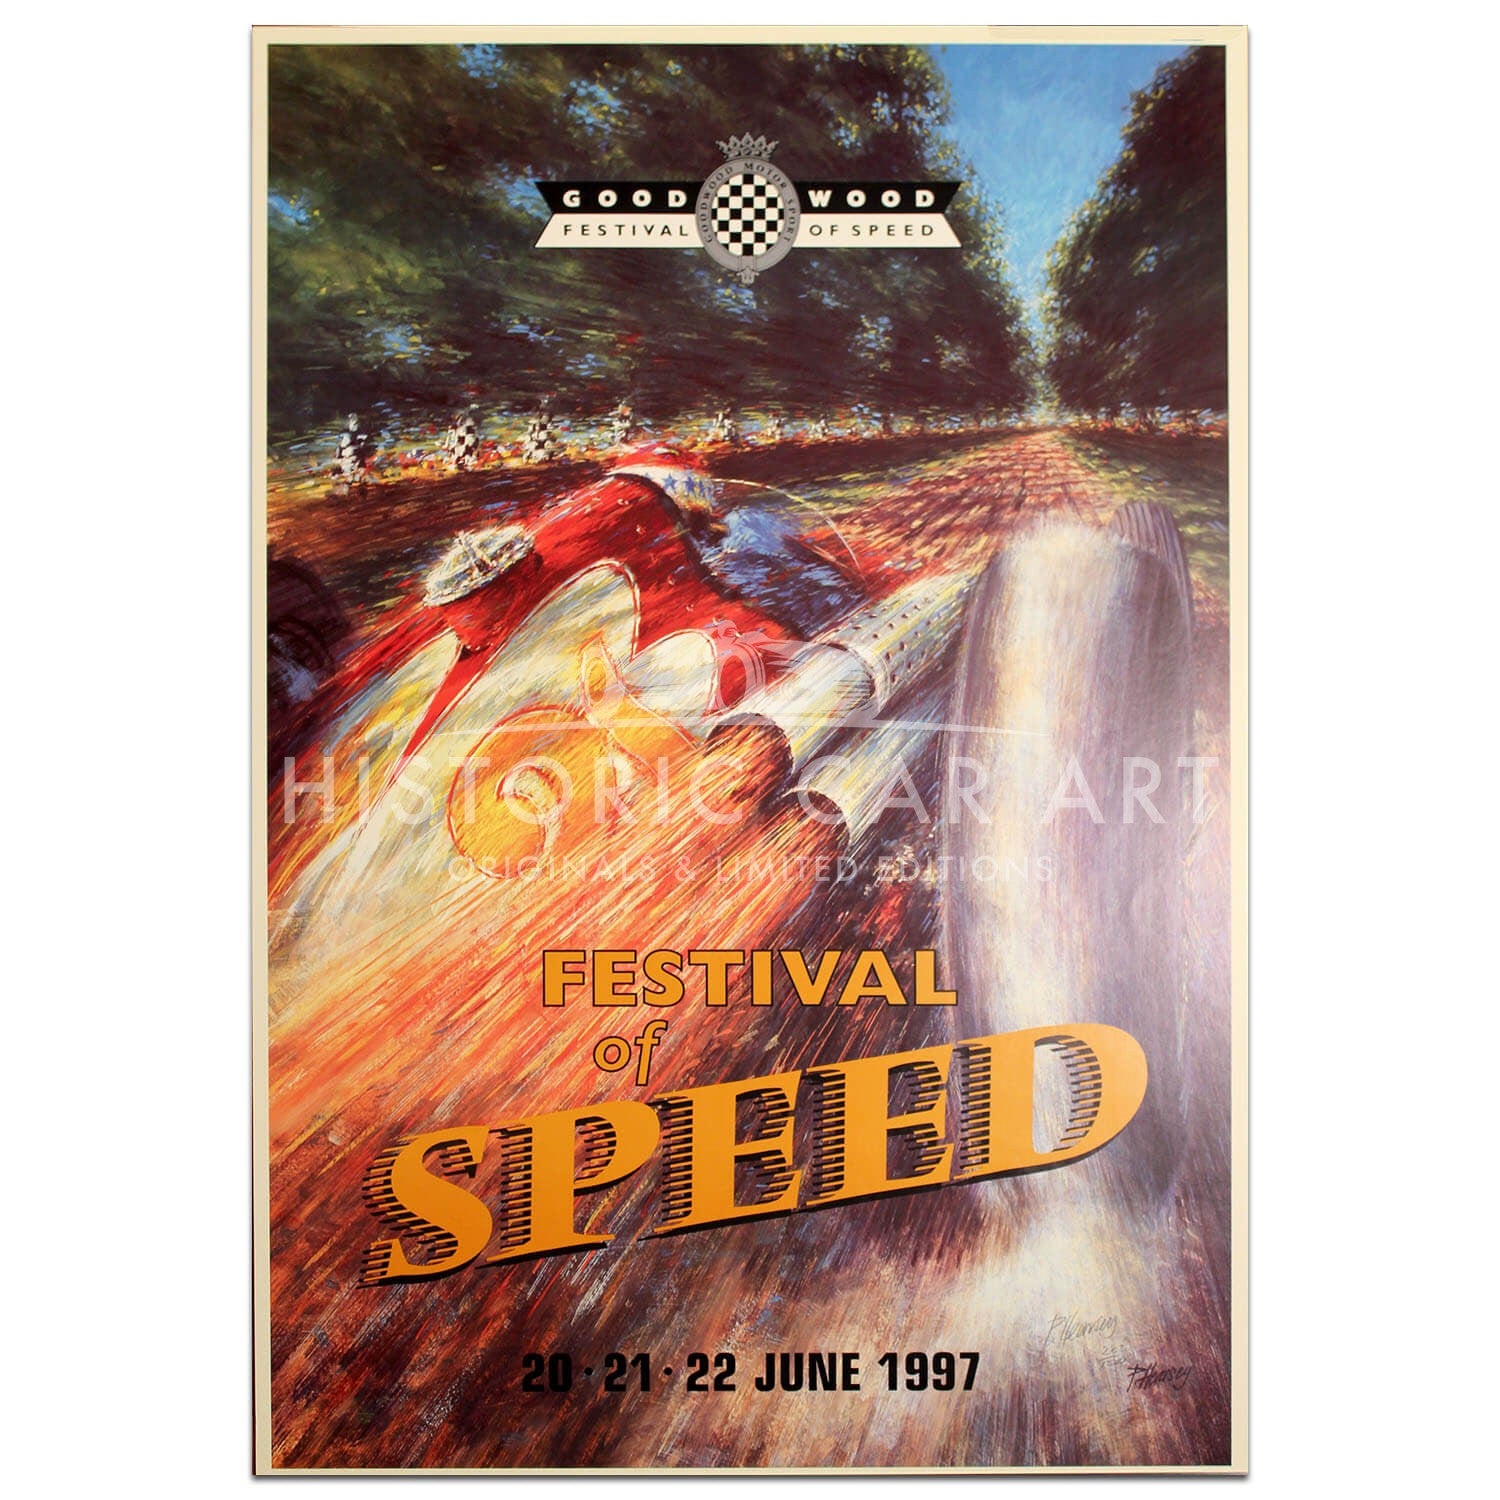 British | Goodwood Festival of Speed 1997 Poster